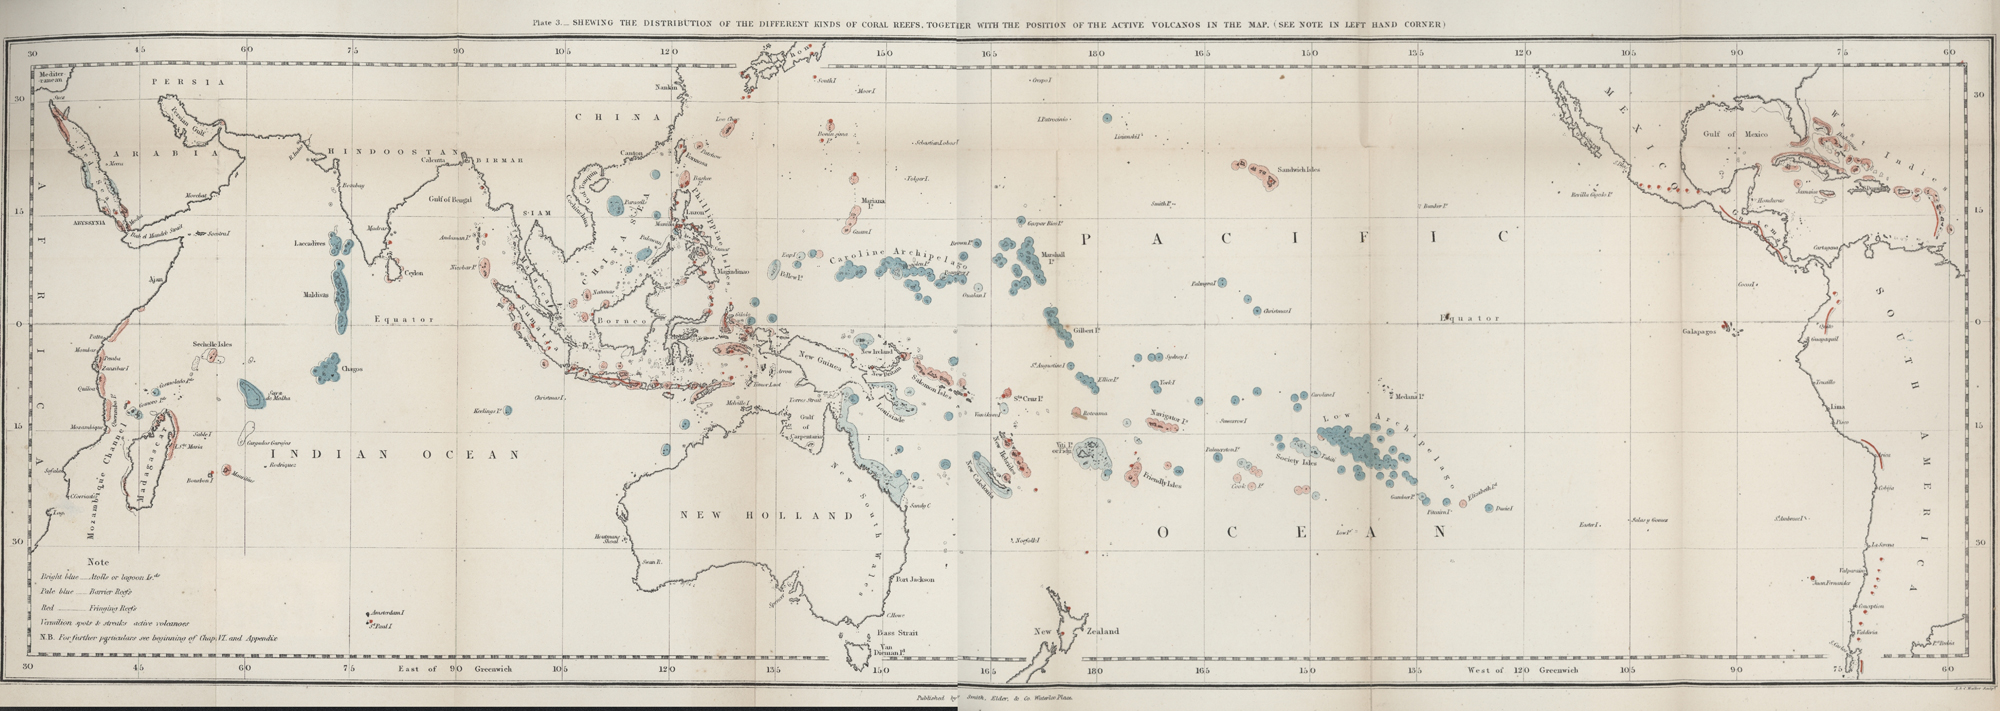 Darwin's map of coral reefs, drawn in 1837.